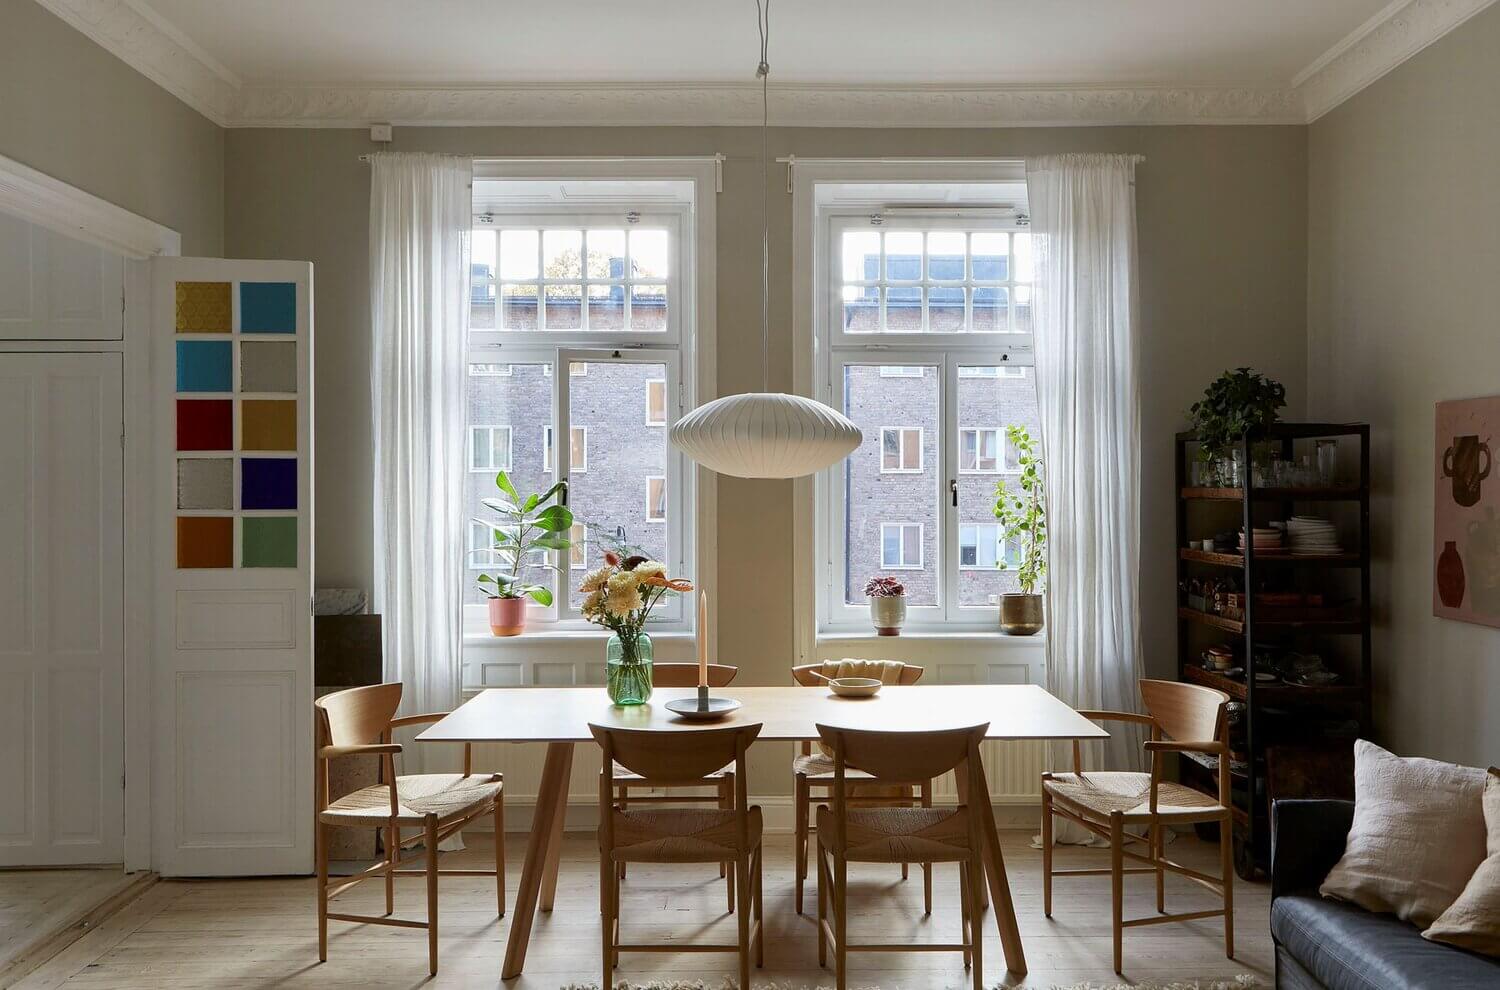 AScandinavianApartmentWithAMintGreenKitchen TheNordroom9 A Scandinavian Apartment With A Mint Green Kitchen